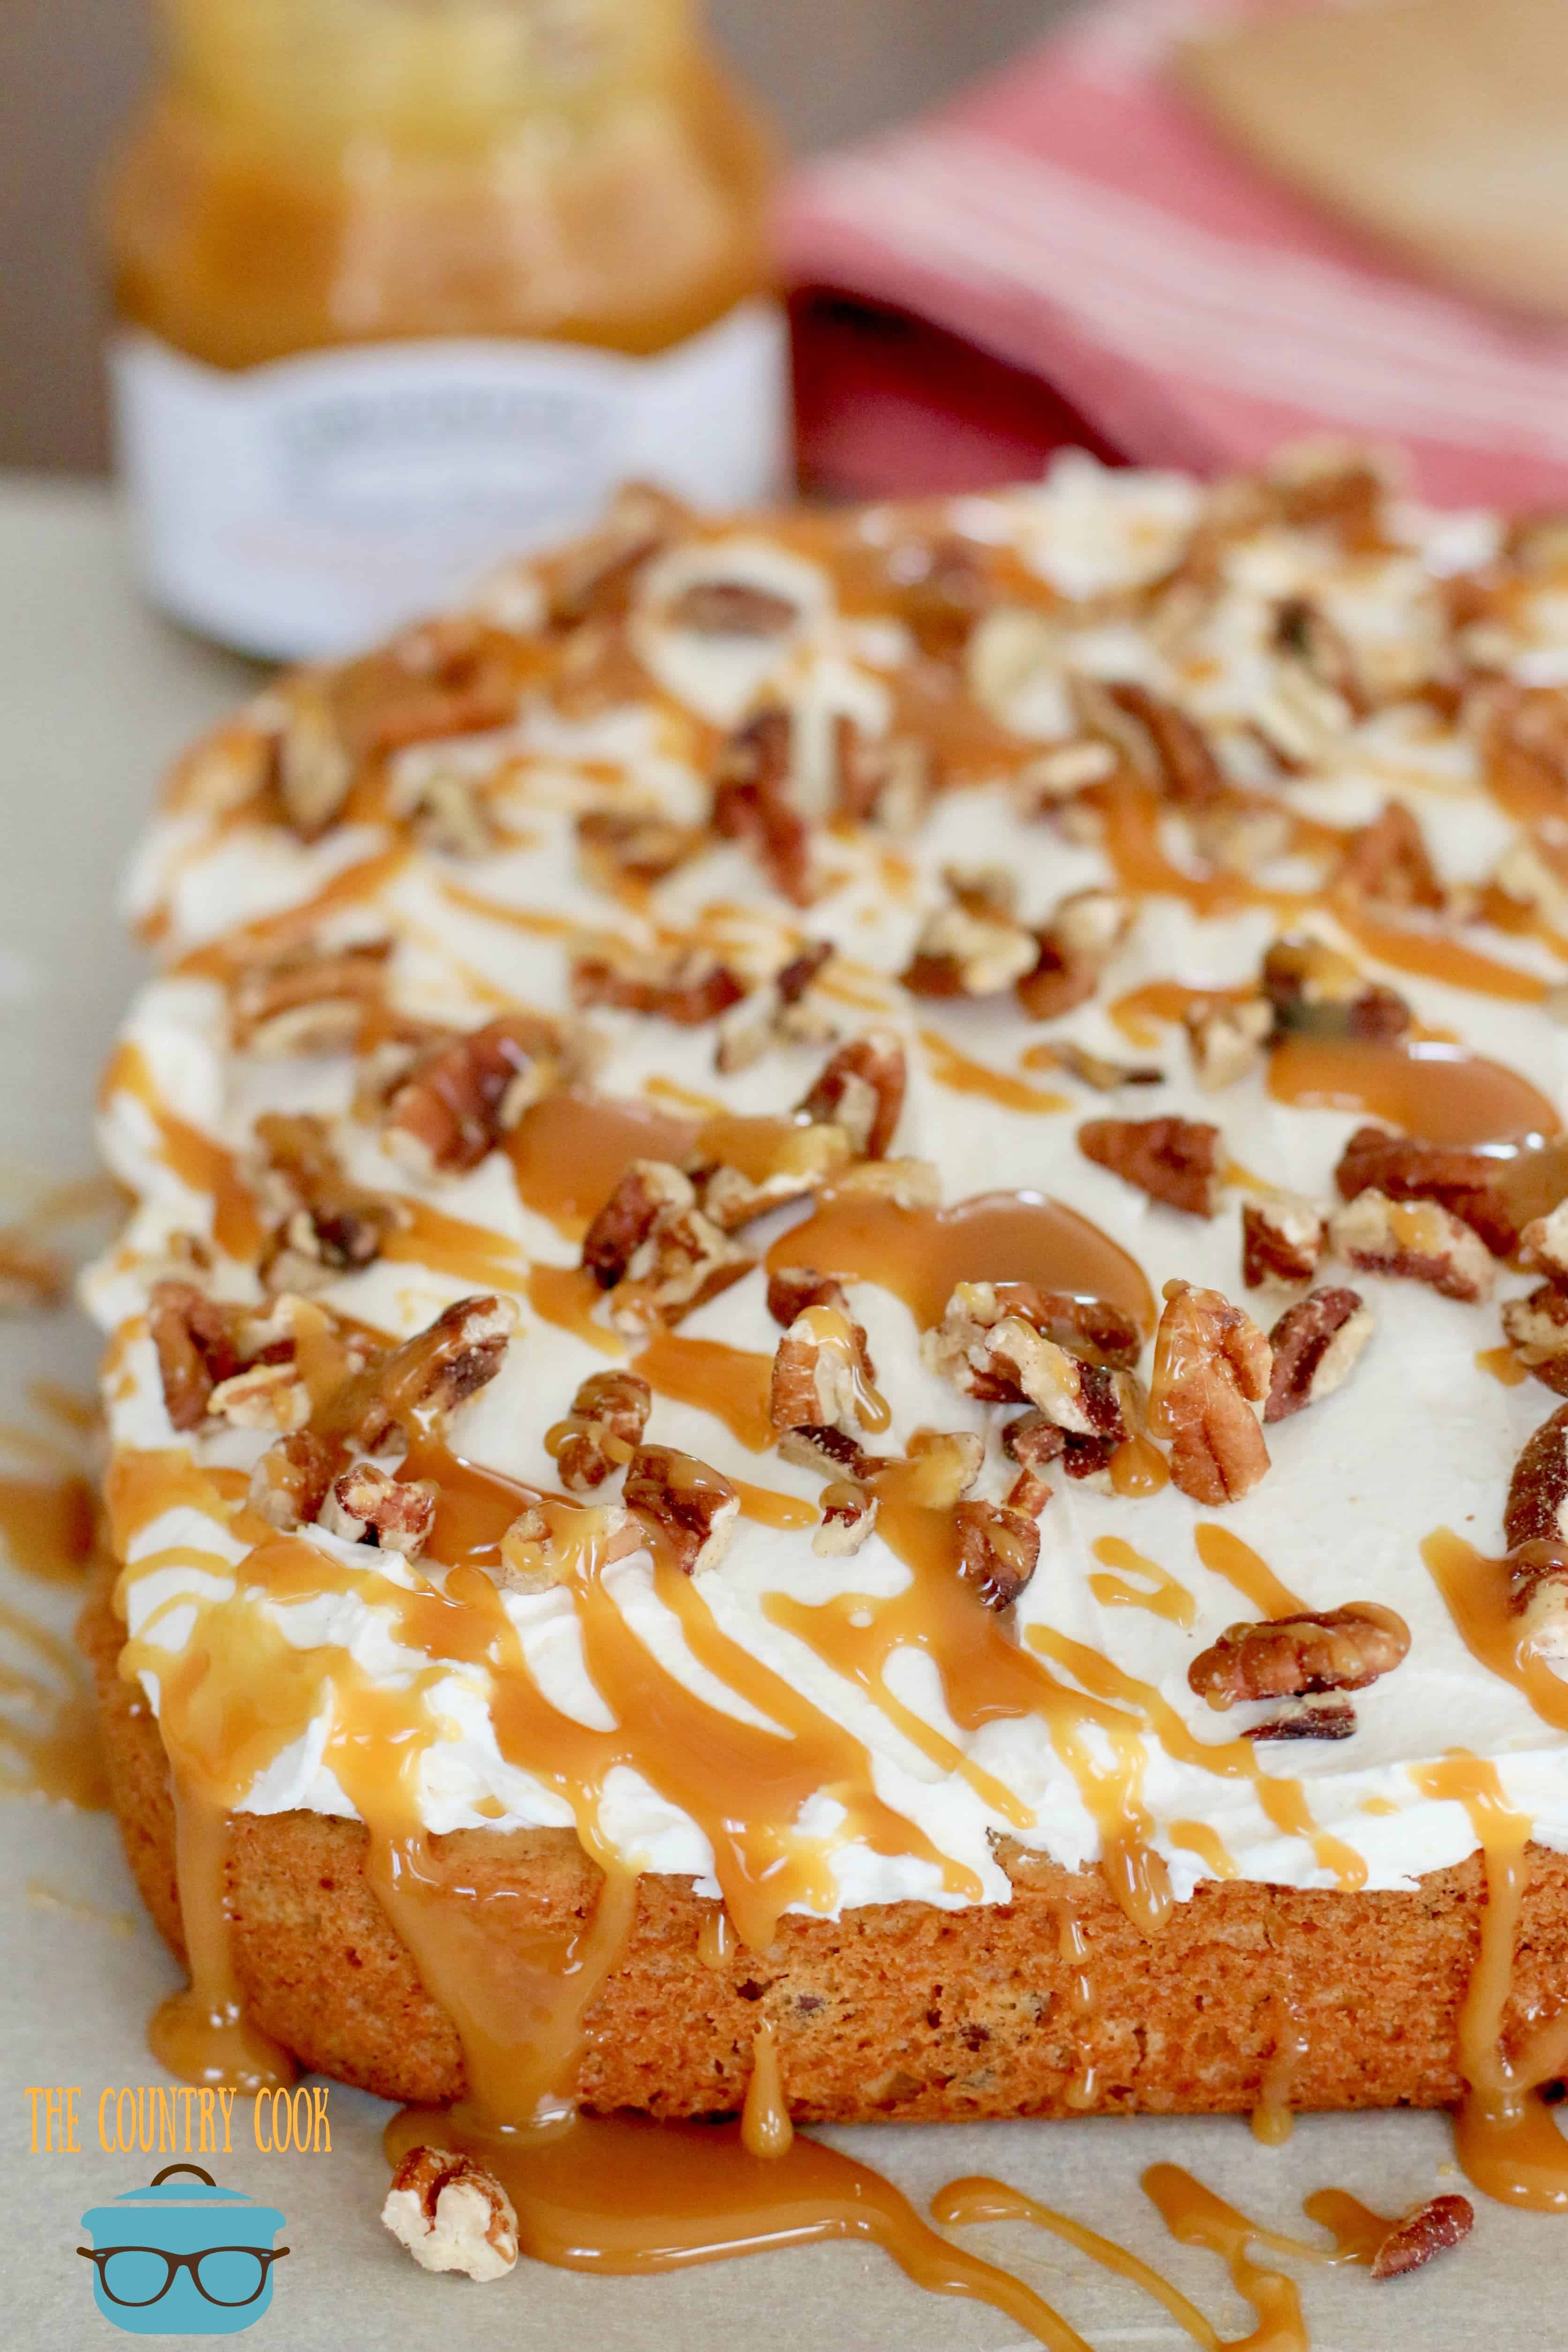 Sweet Potato/Pumpkin muffin mix cake topped with marshmallow frosting and caramel sauce shown close up.